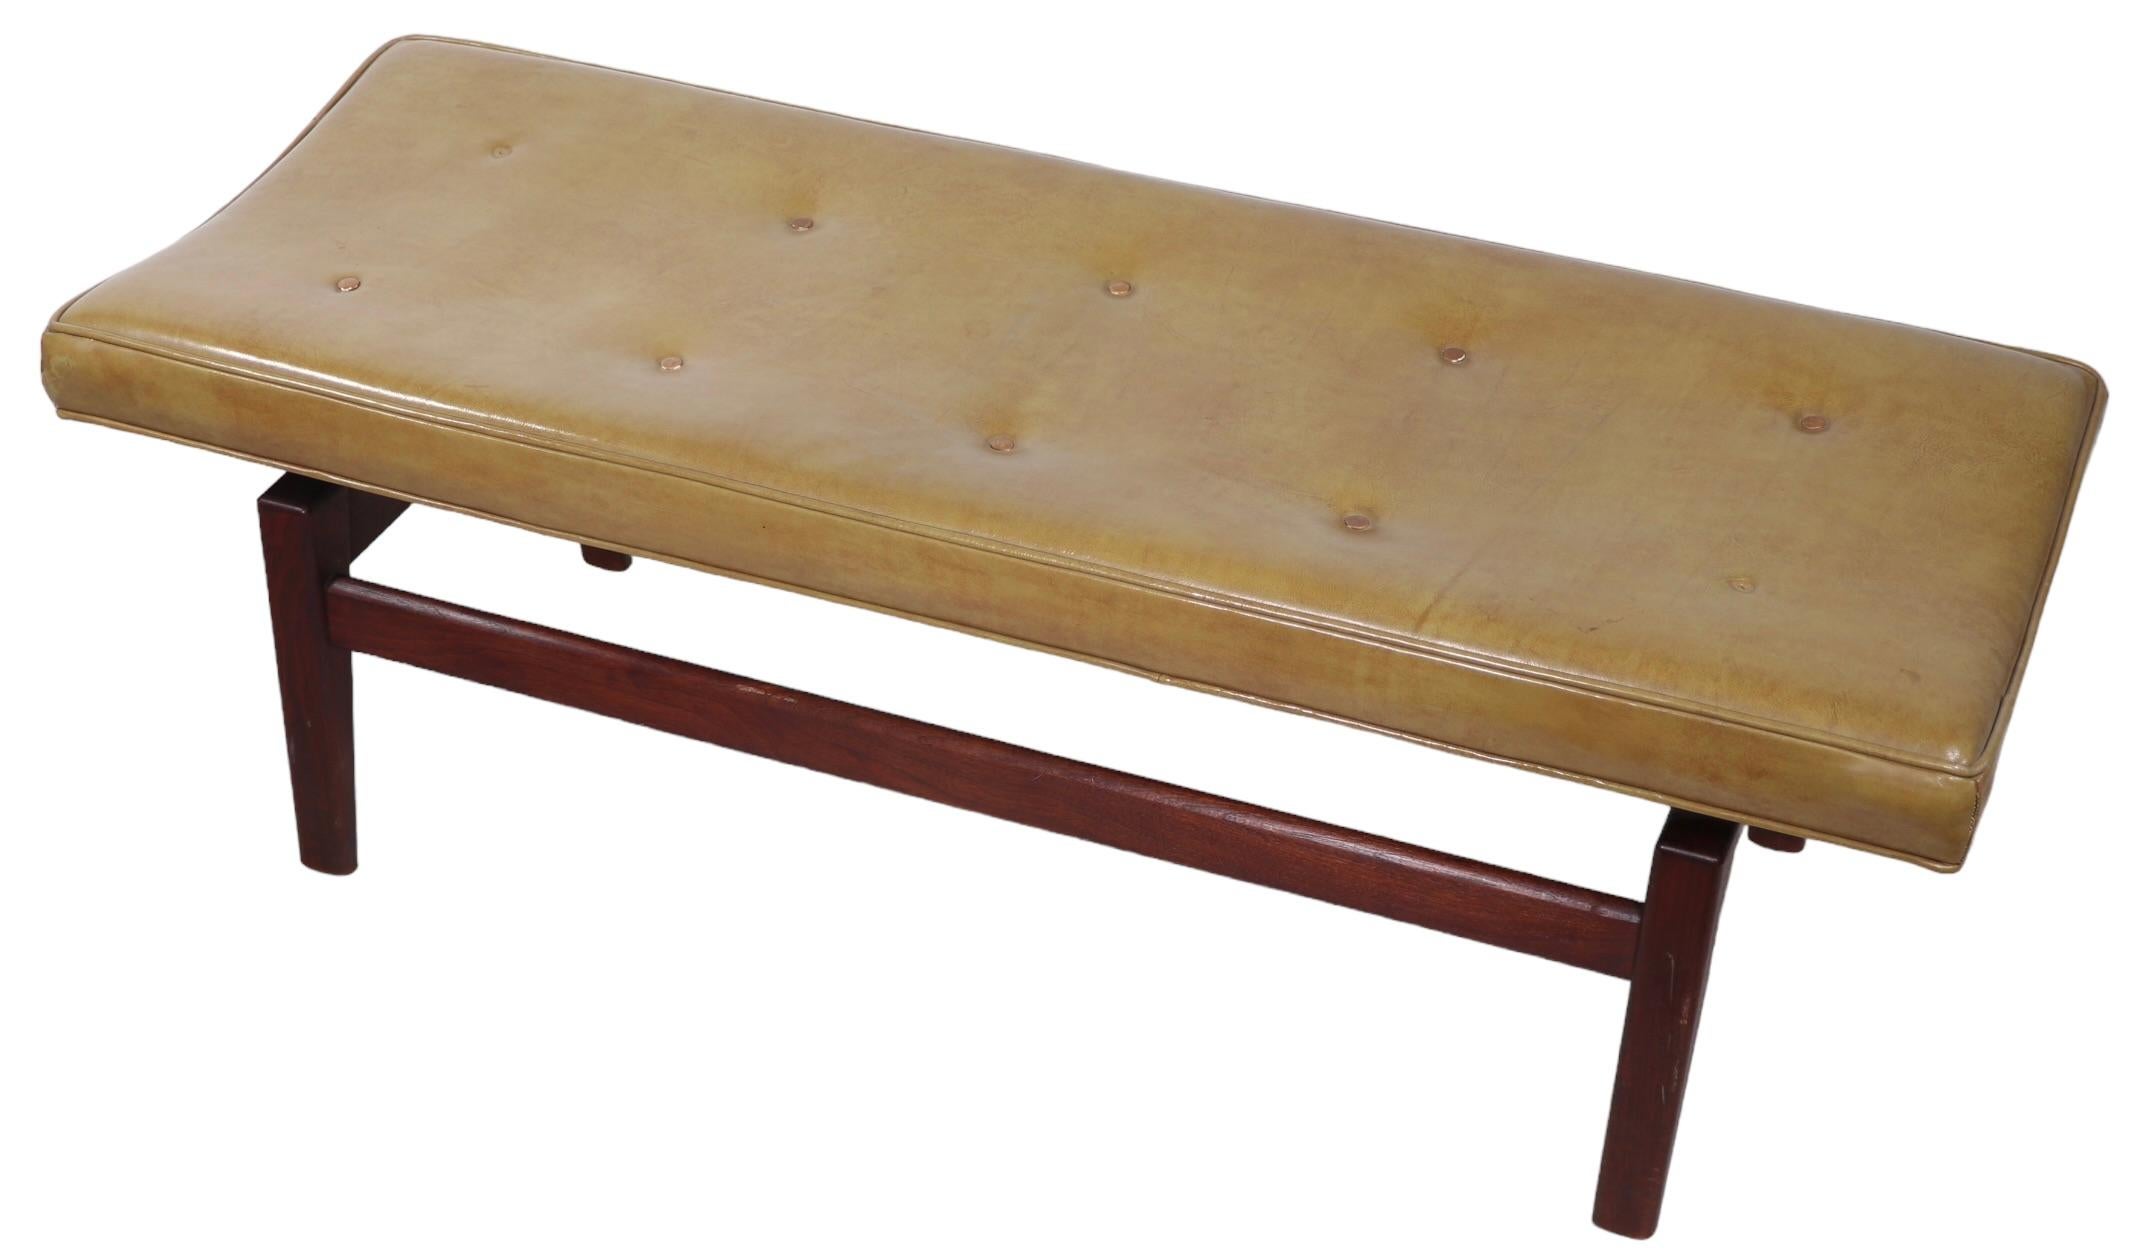   Architectural Mid Century Jens Risom Bench with Walnut Legs and Leather Top  For Sale 3